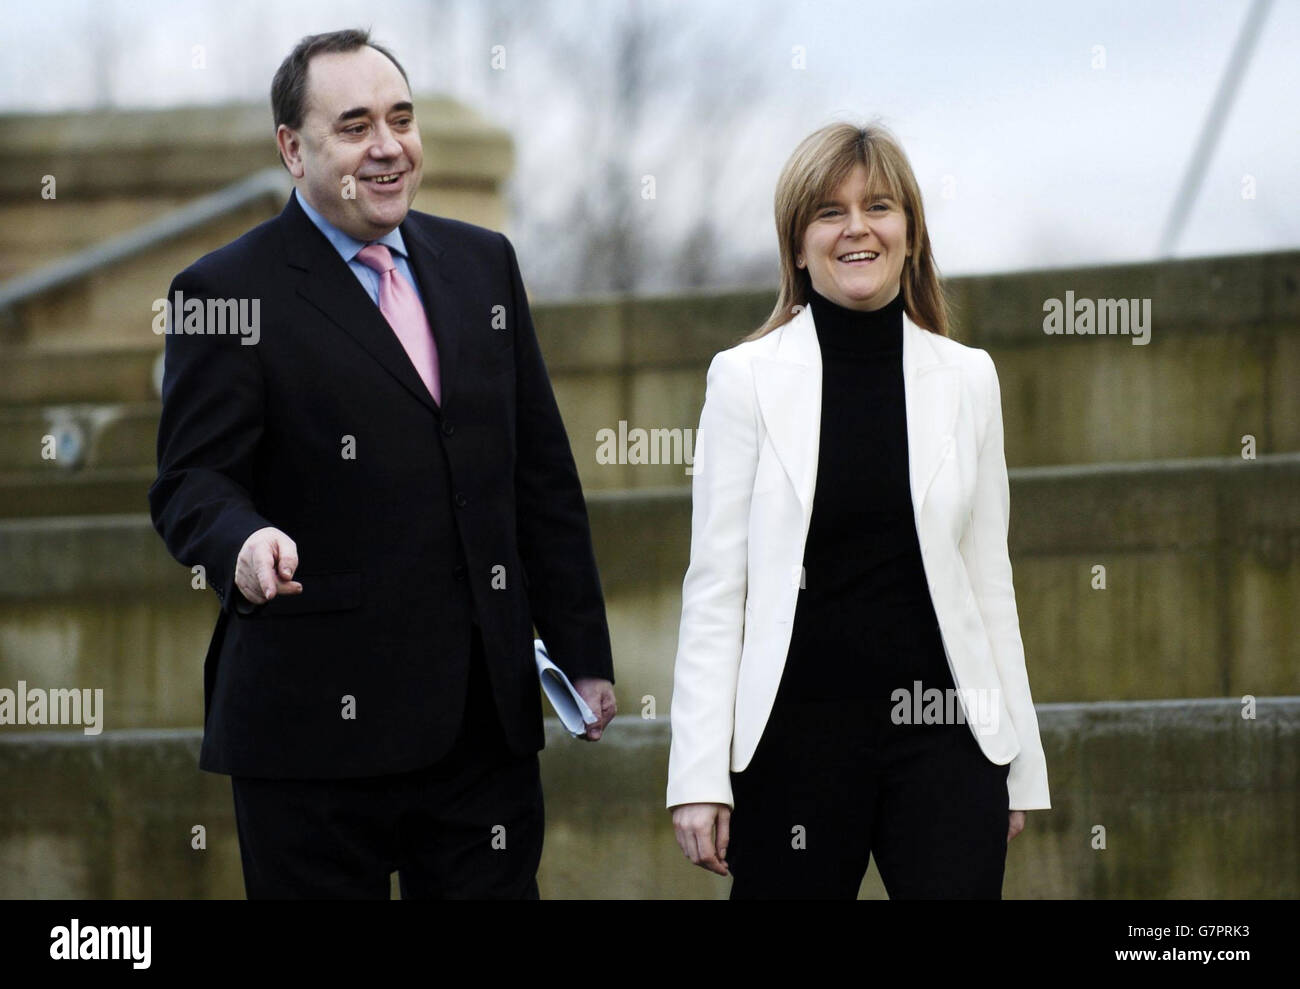 Deputy leader Nicola Sturgeon and leader of the Scottish National party Alex Salmond after his campaign launch speech. Stock Photo